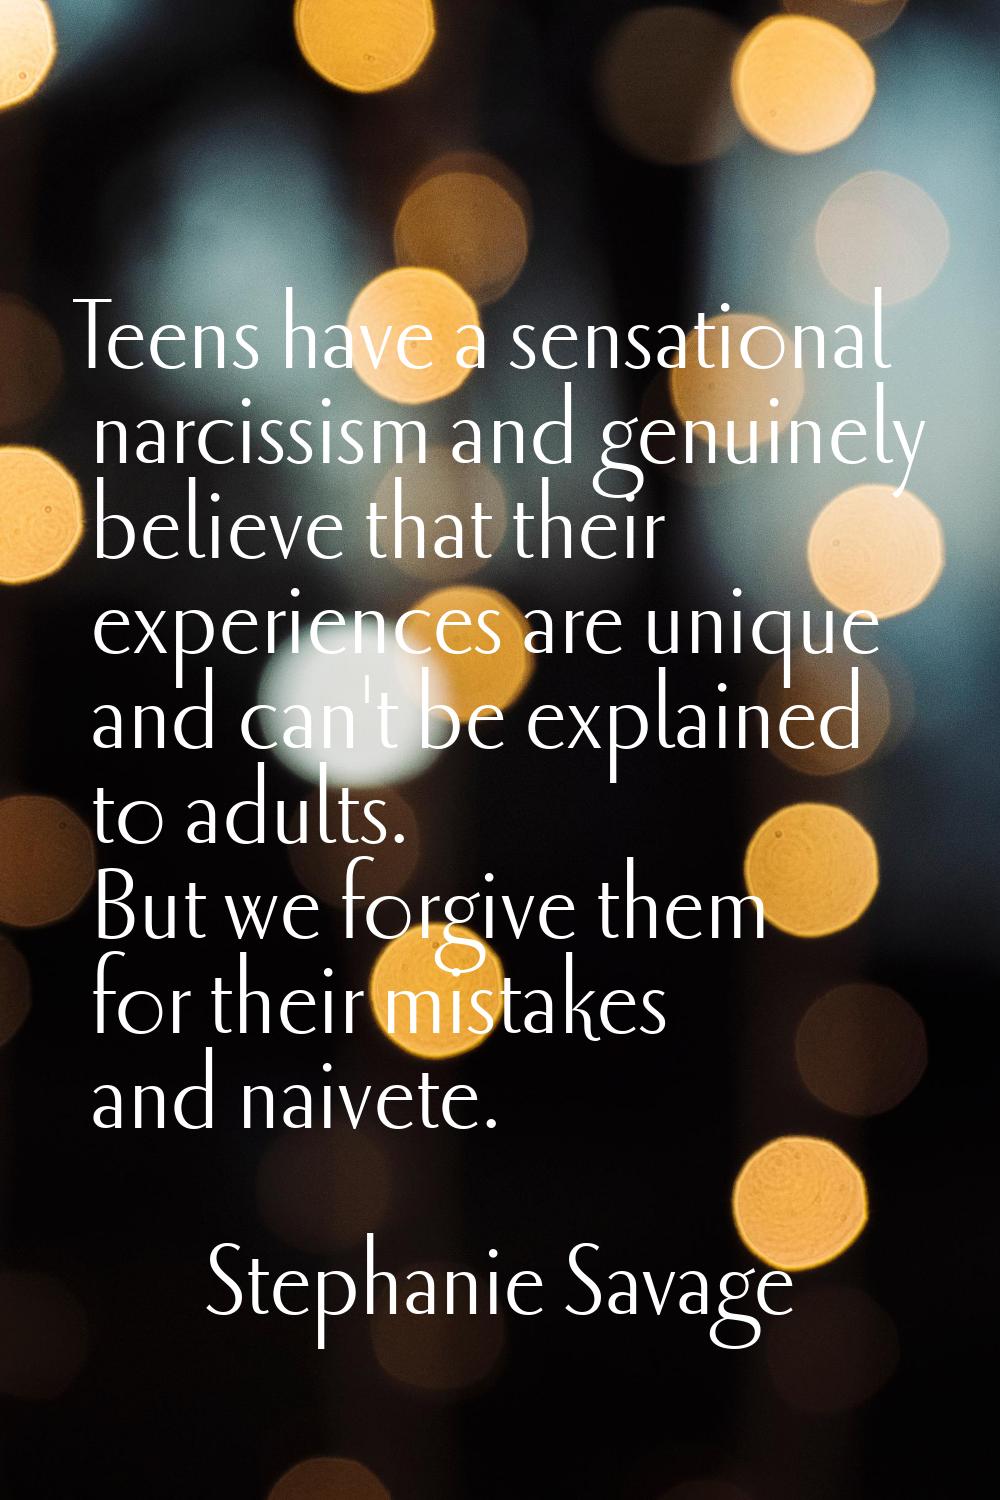 Teens have a sensational narcissism and genuinely believe that their experiences are unique and can